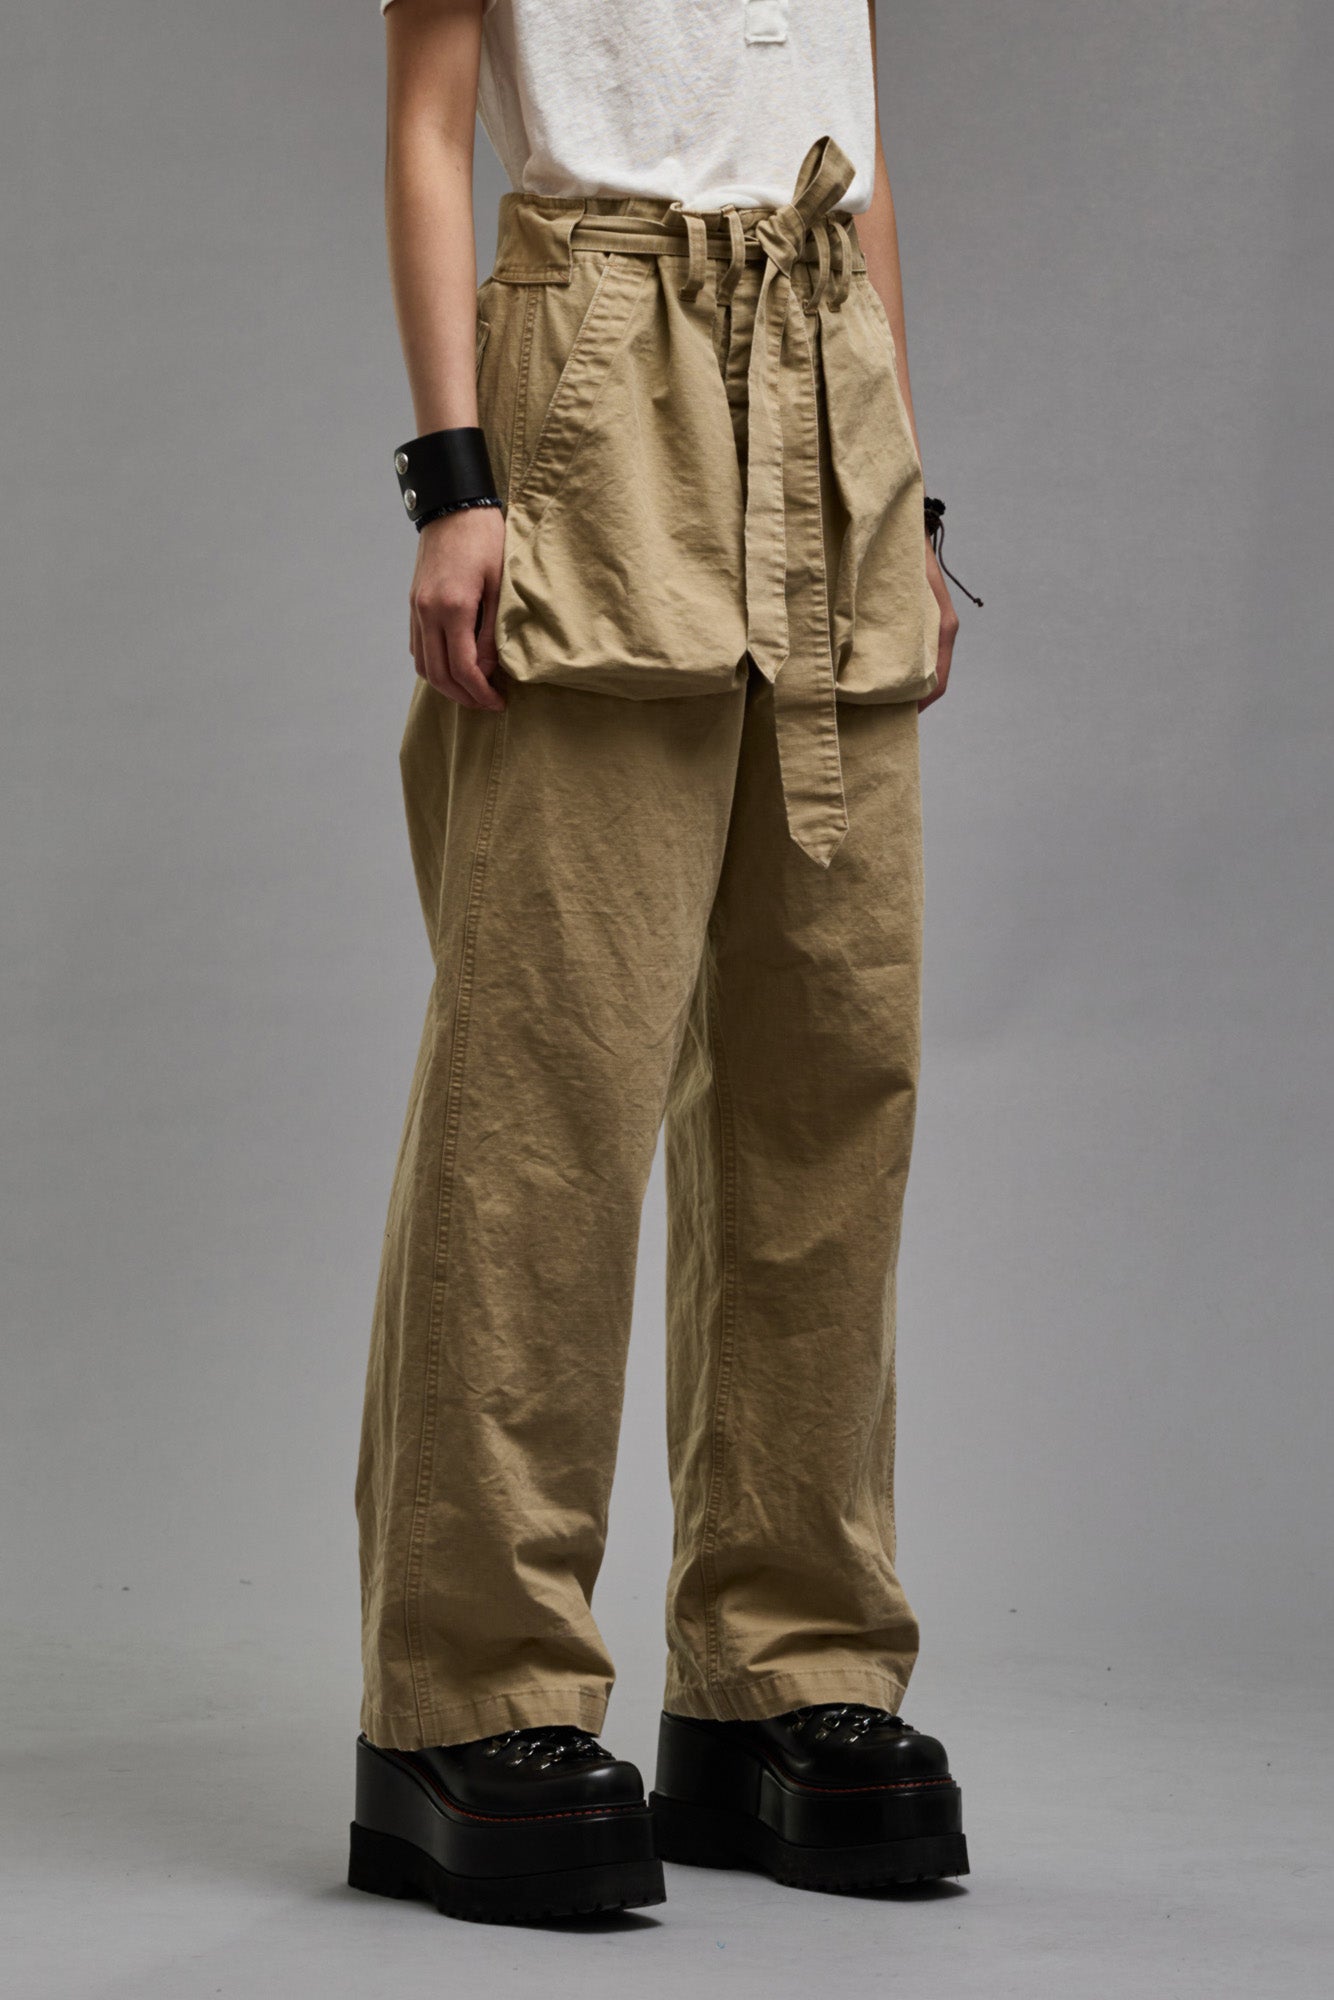 BELTED UTILITY PANT - KHAKI RIPSTOP – R13